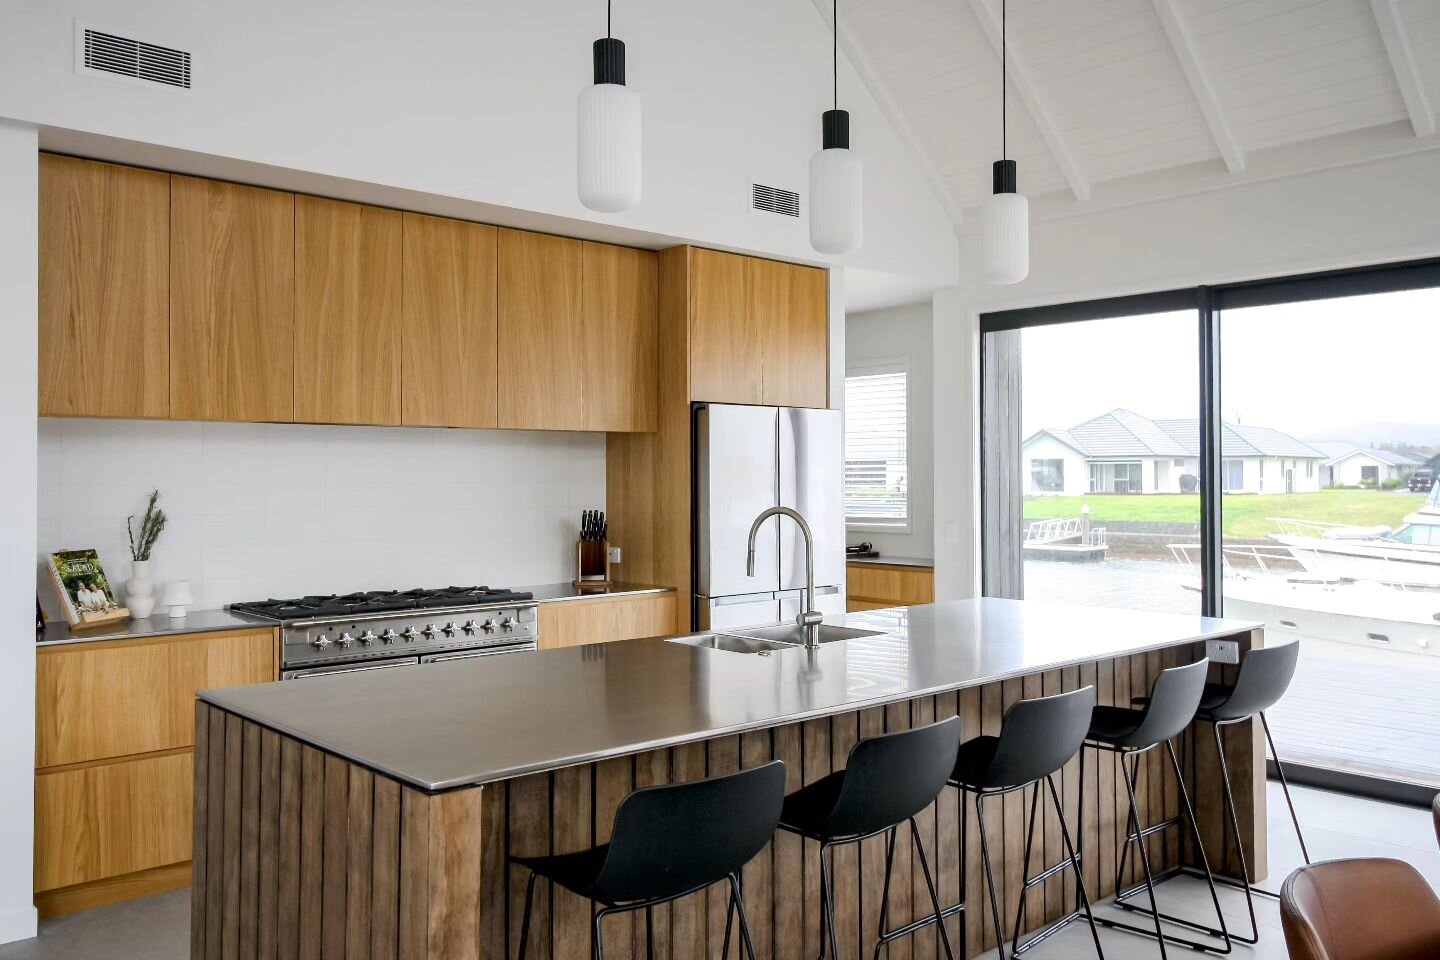 Marsden Cove kitchen.  A raw material palette with warm natural timbers, stainless steel and stone to reflect the exterior cladding and bring the outdoors in. 

Interior Design by @vue_concepts_ 
Architecture by @nickrowe.architecture 
Construction b